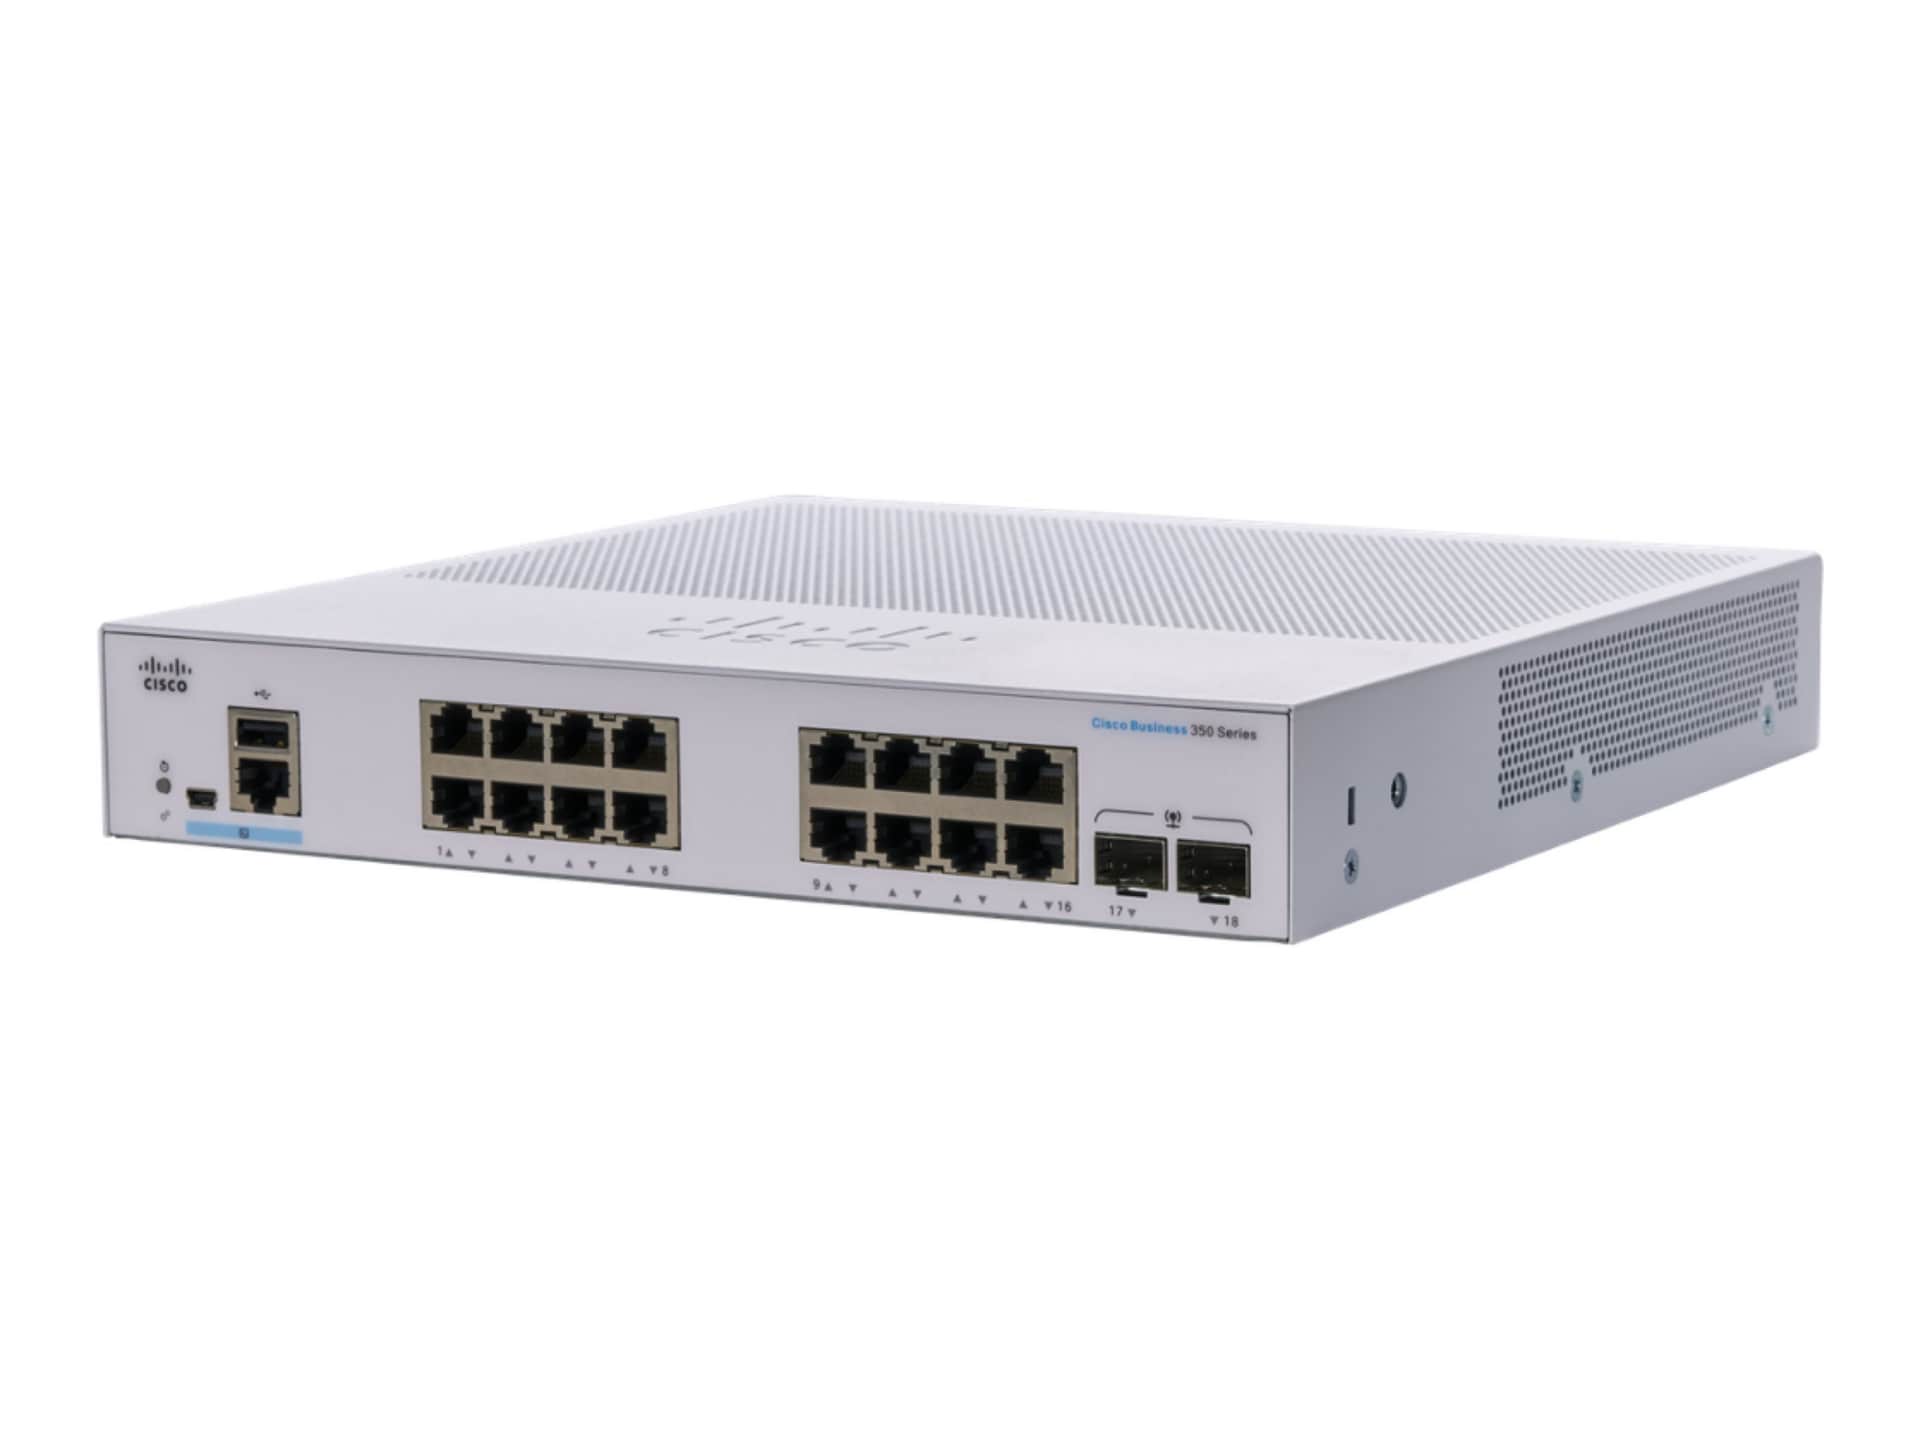 Cisco Business 350 Series CBS350-16T-E-2G - switch - 18 ports - managed - r